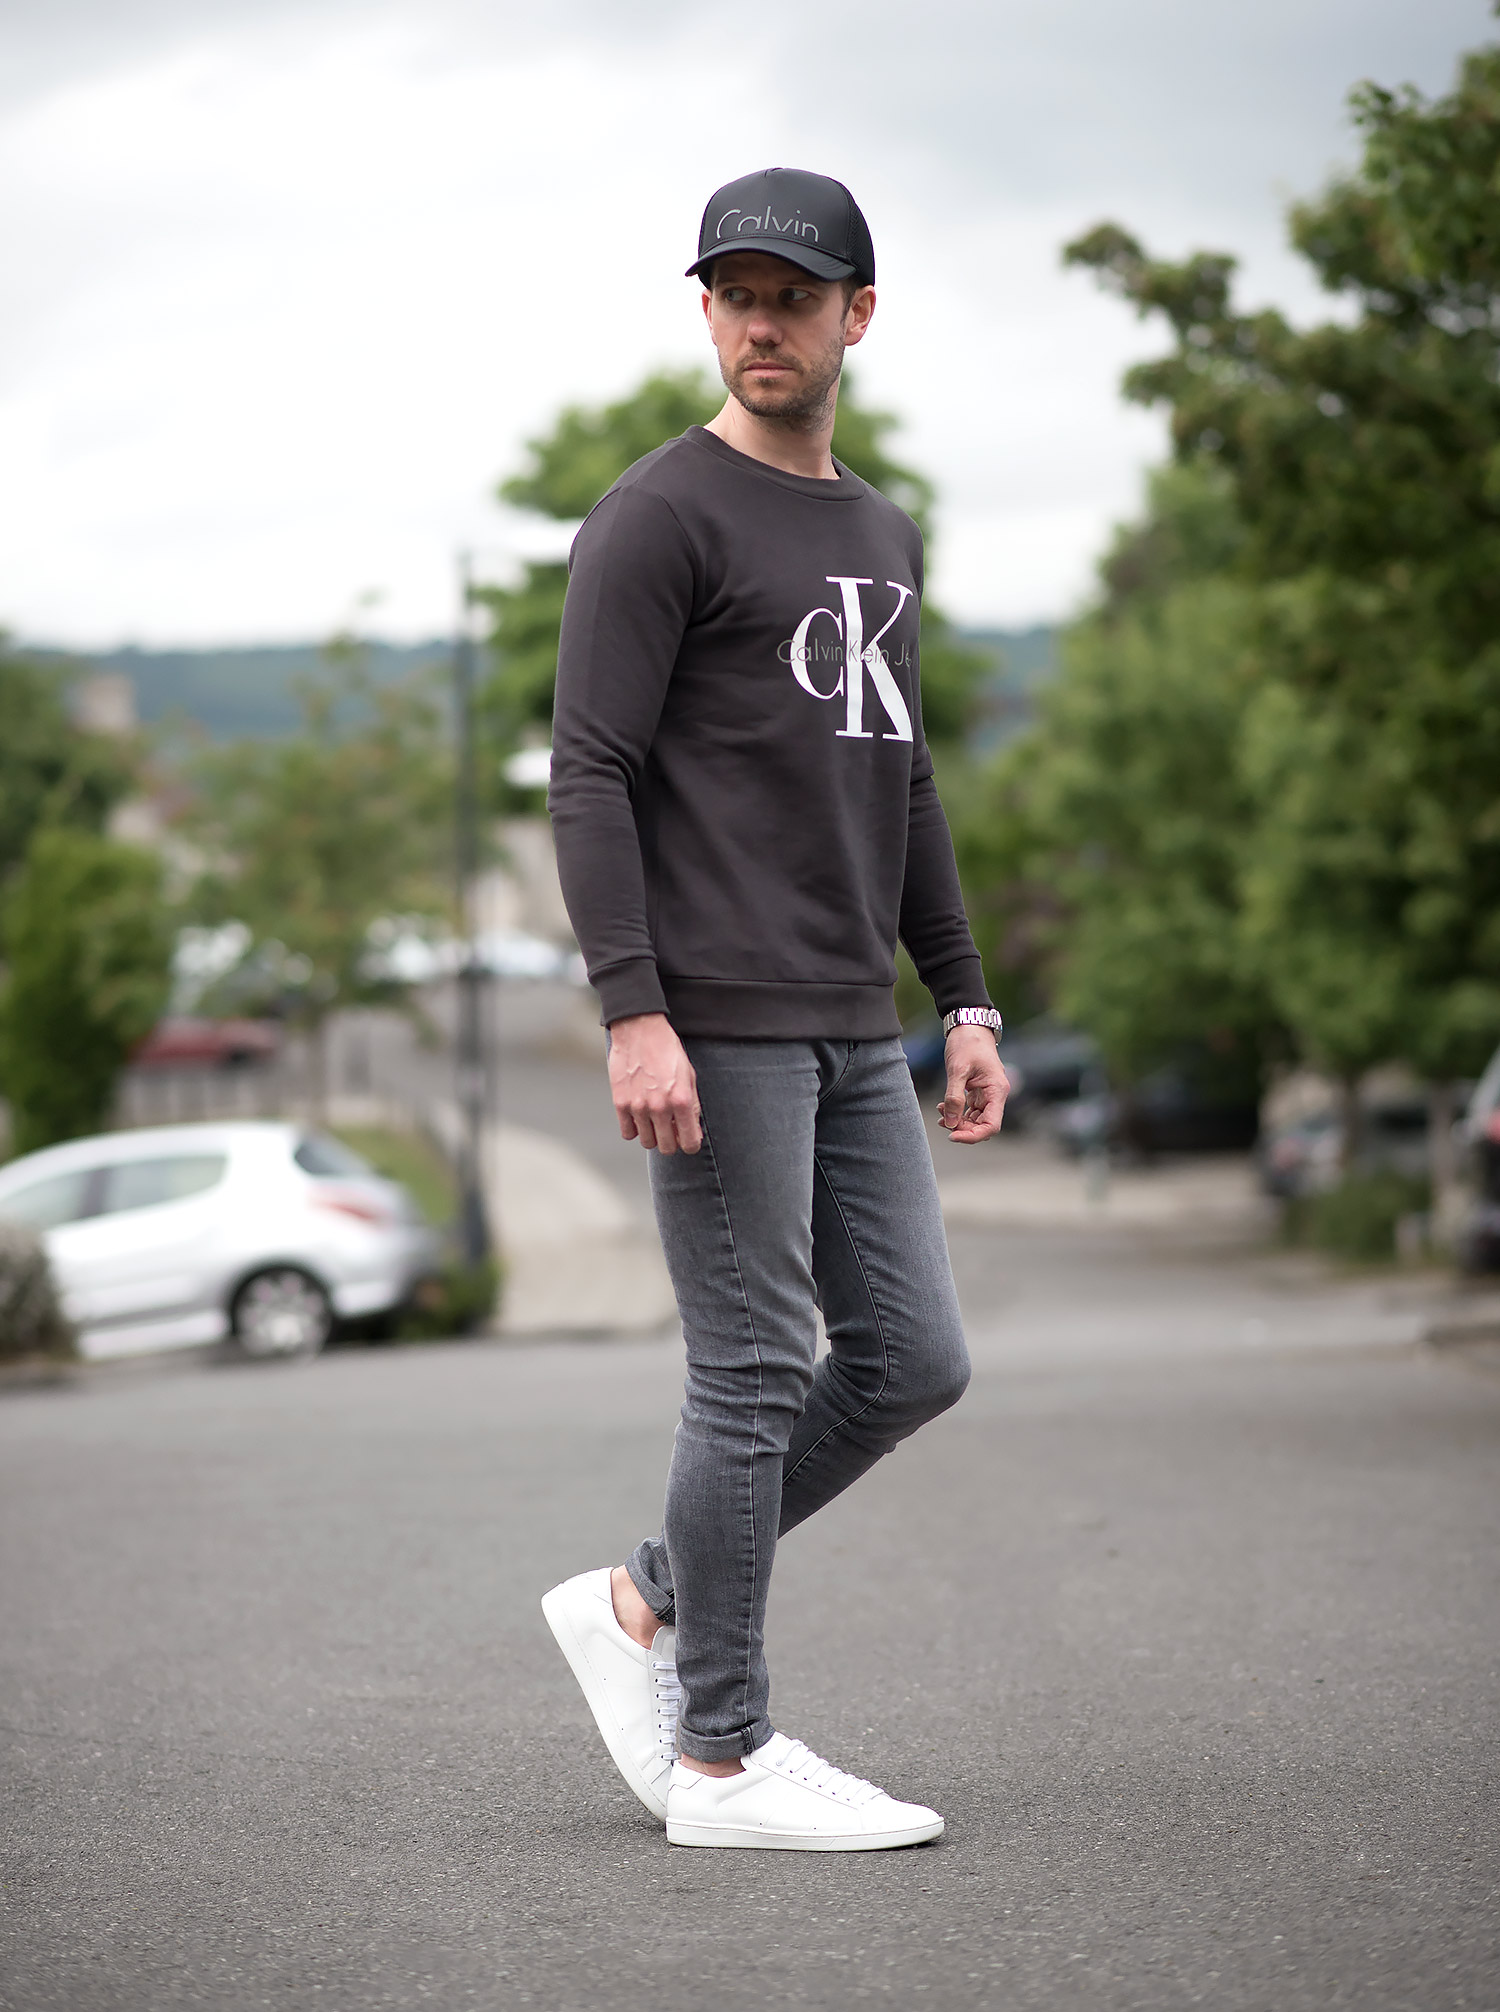 Calvin Klein Sweatshirt And J Brand Grey Skinny Jeans Outfit - Your ...